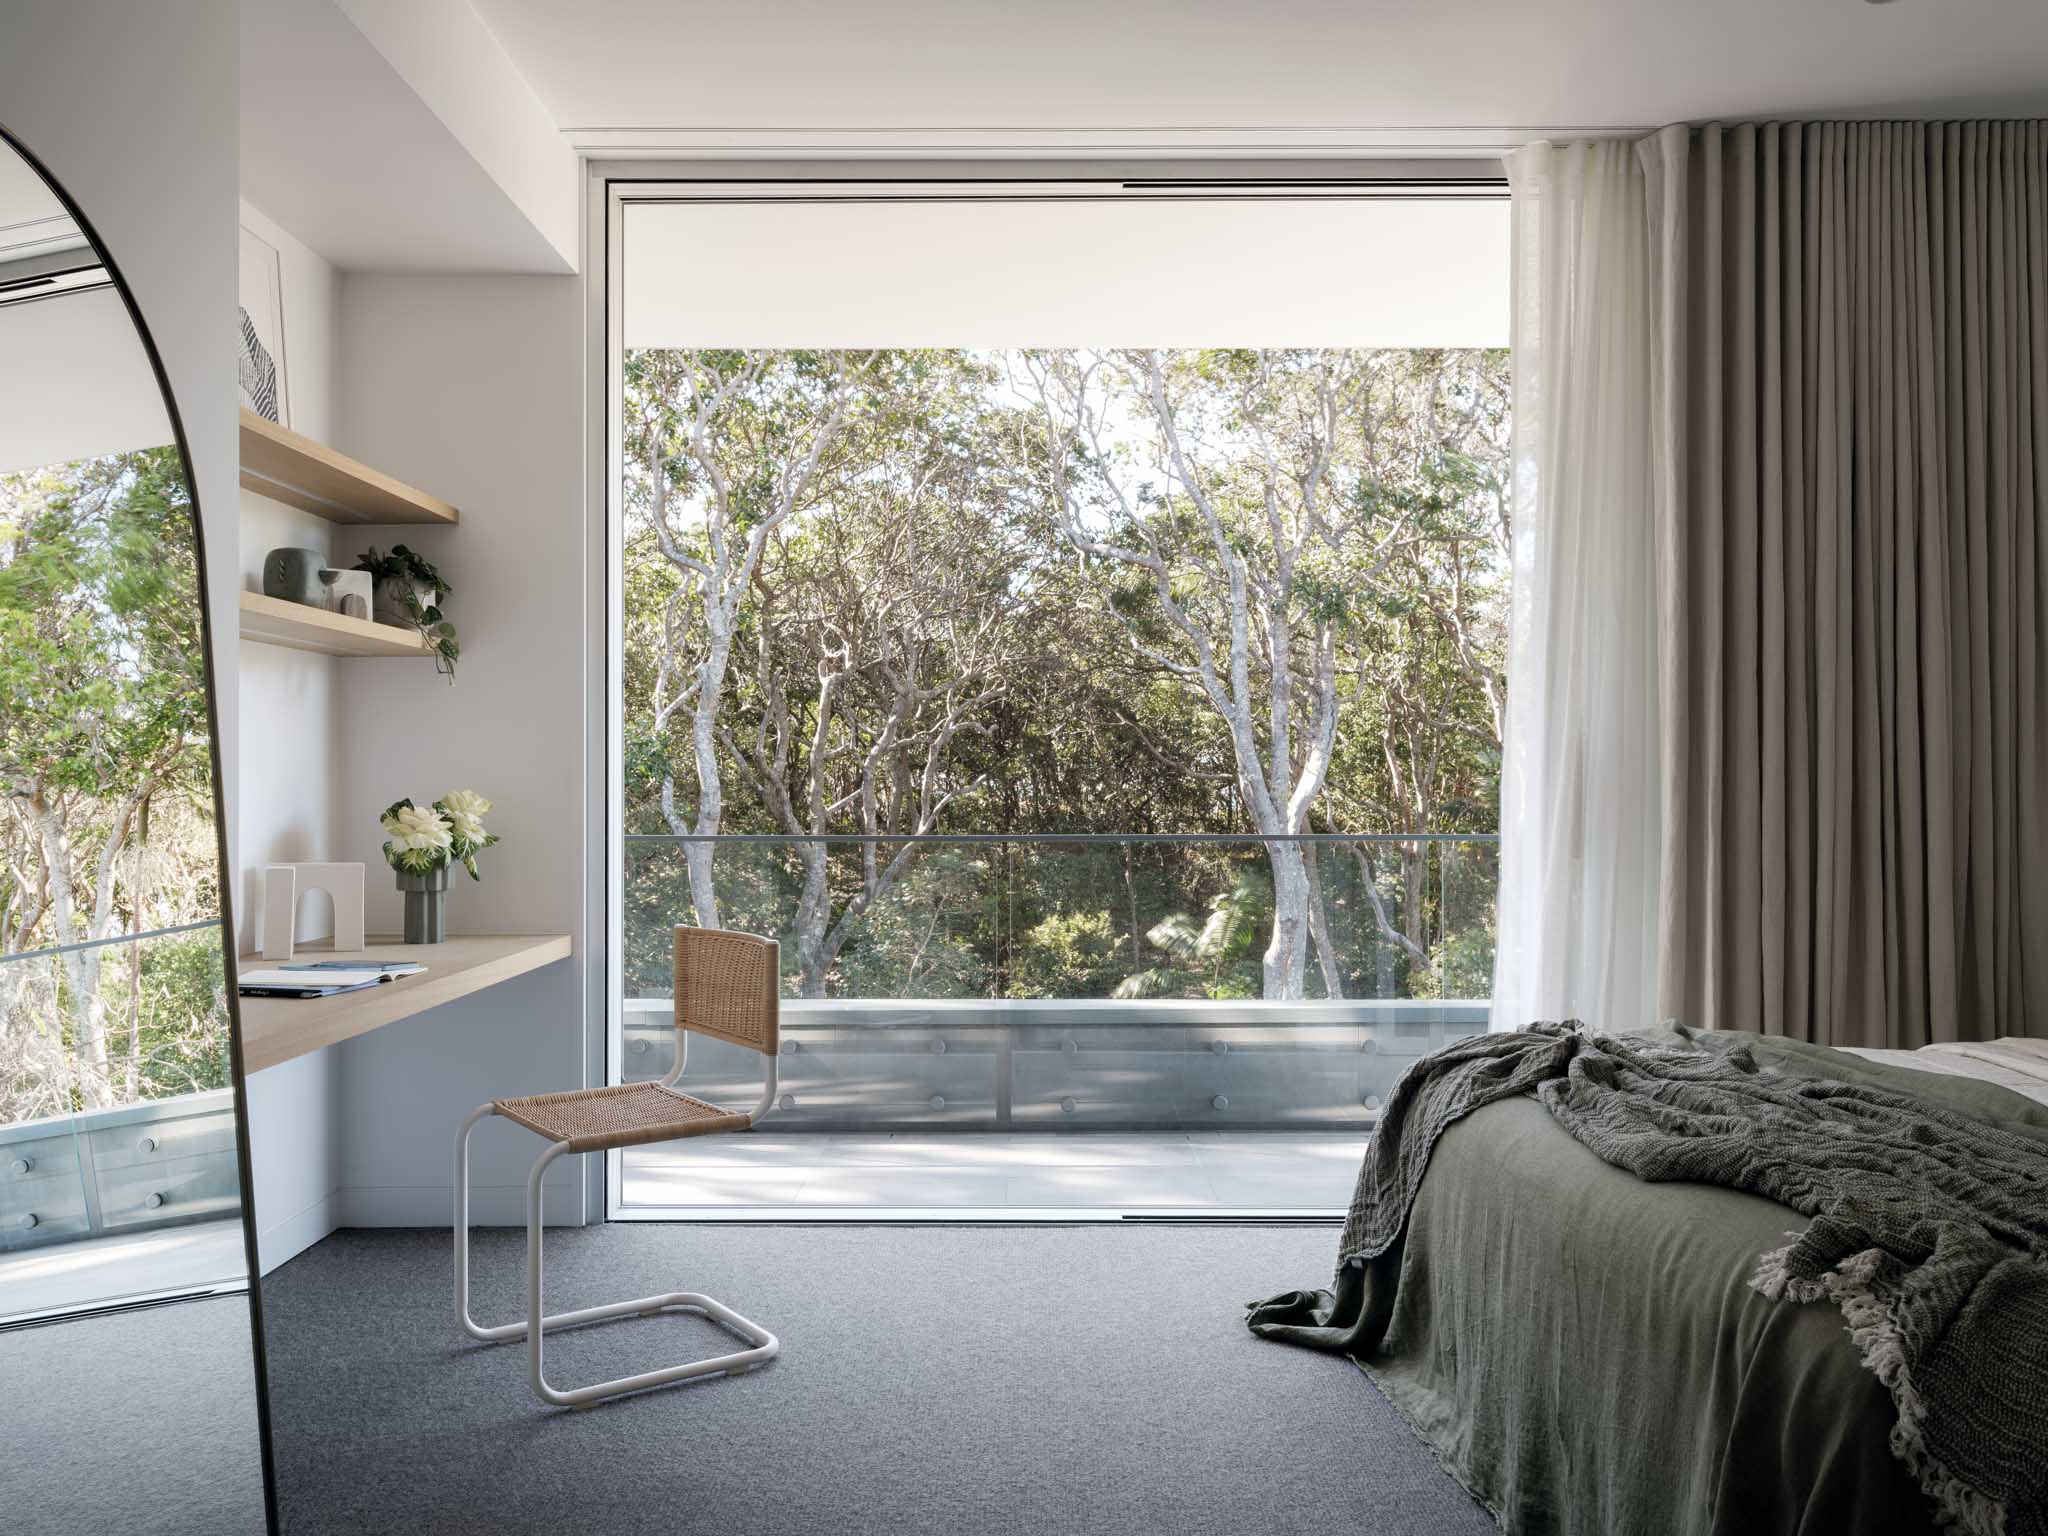 Kasa Byron Bay. Photography by Tom Ferguson. Bedroom overlooking treetops from adjoining balcony. Dark carpets and beige curtains. Study nook and mirror to left of image. 